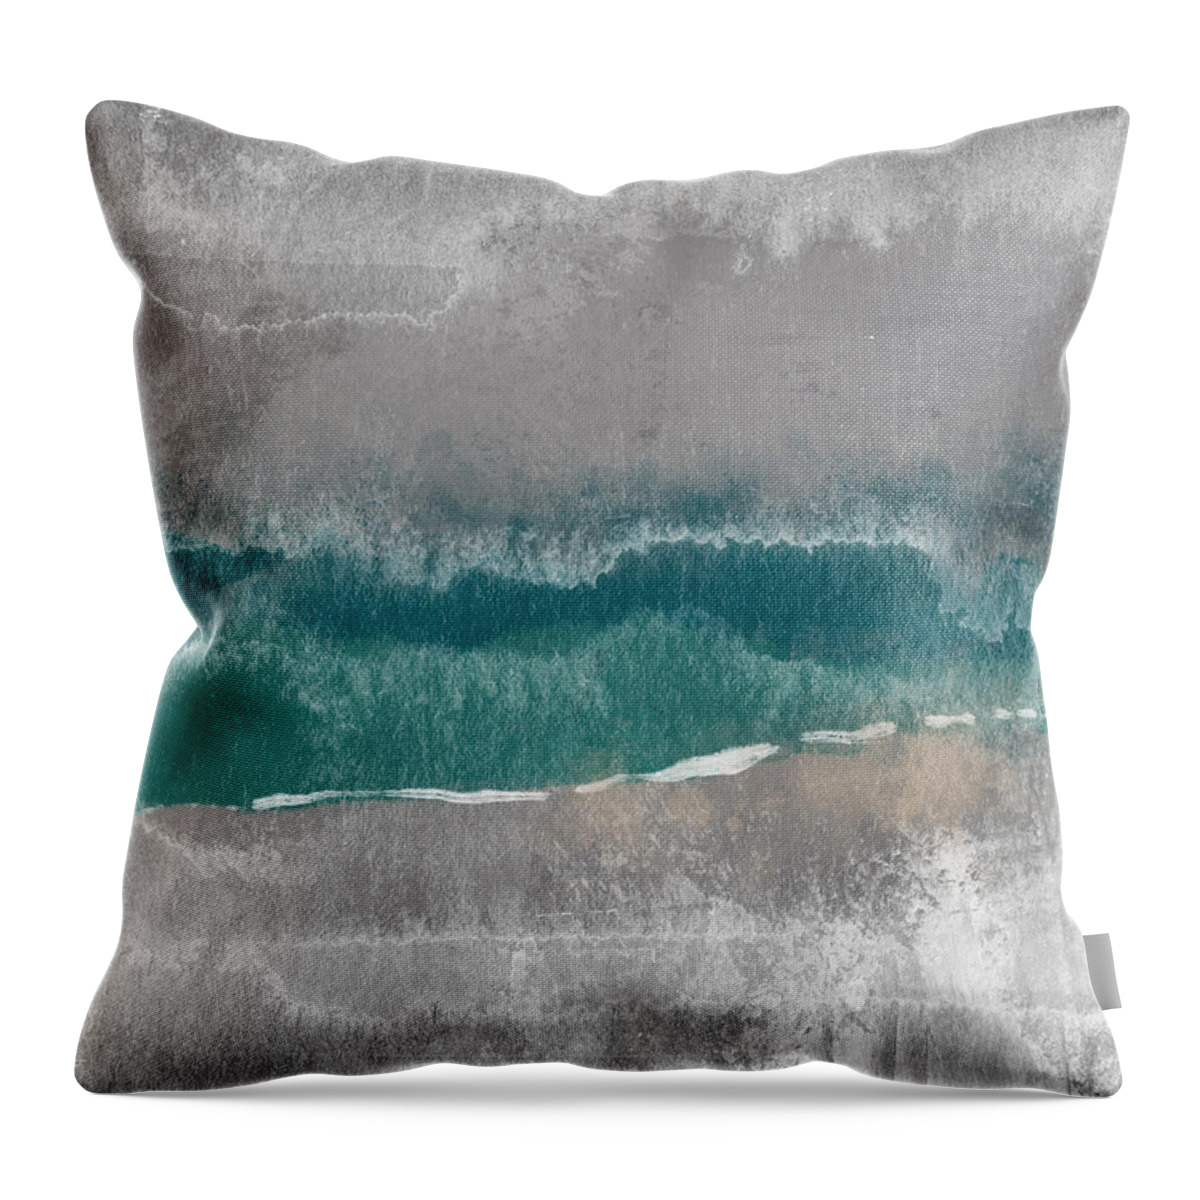 Beach Throw Pillow featuring the mixed media Abstract Beach Landscape- Art by Linda Woods by Linda Woods